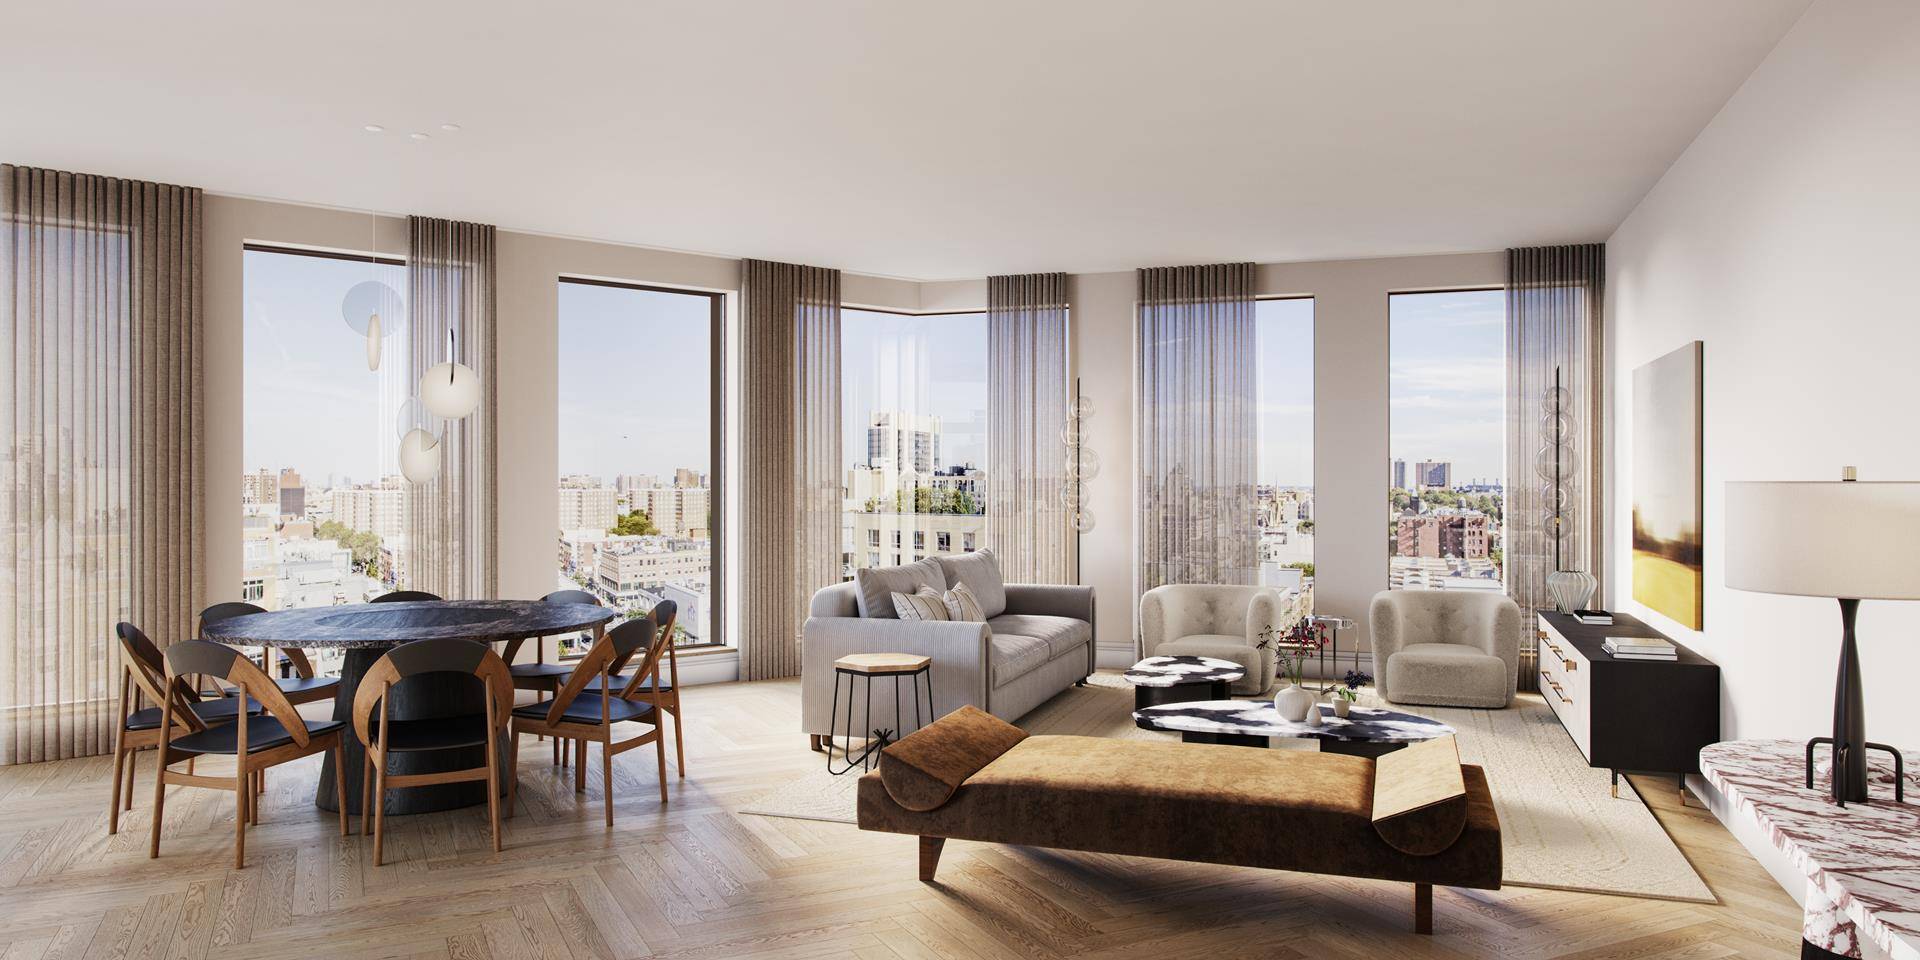 Sales Gallery Now Open By Appointment Introducing the impeccable residence 14C at 300 West, a 1, 400 square foot eastern facing three bedroom, two and half bathroom, offering a 235 ...